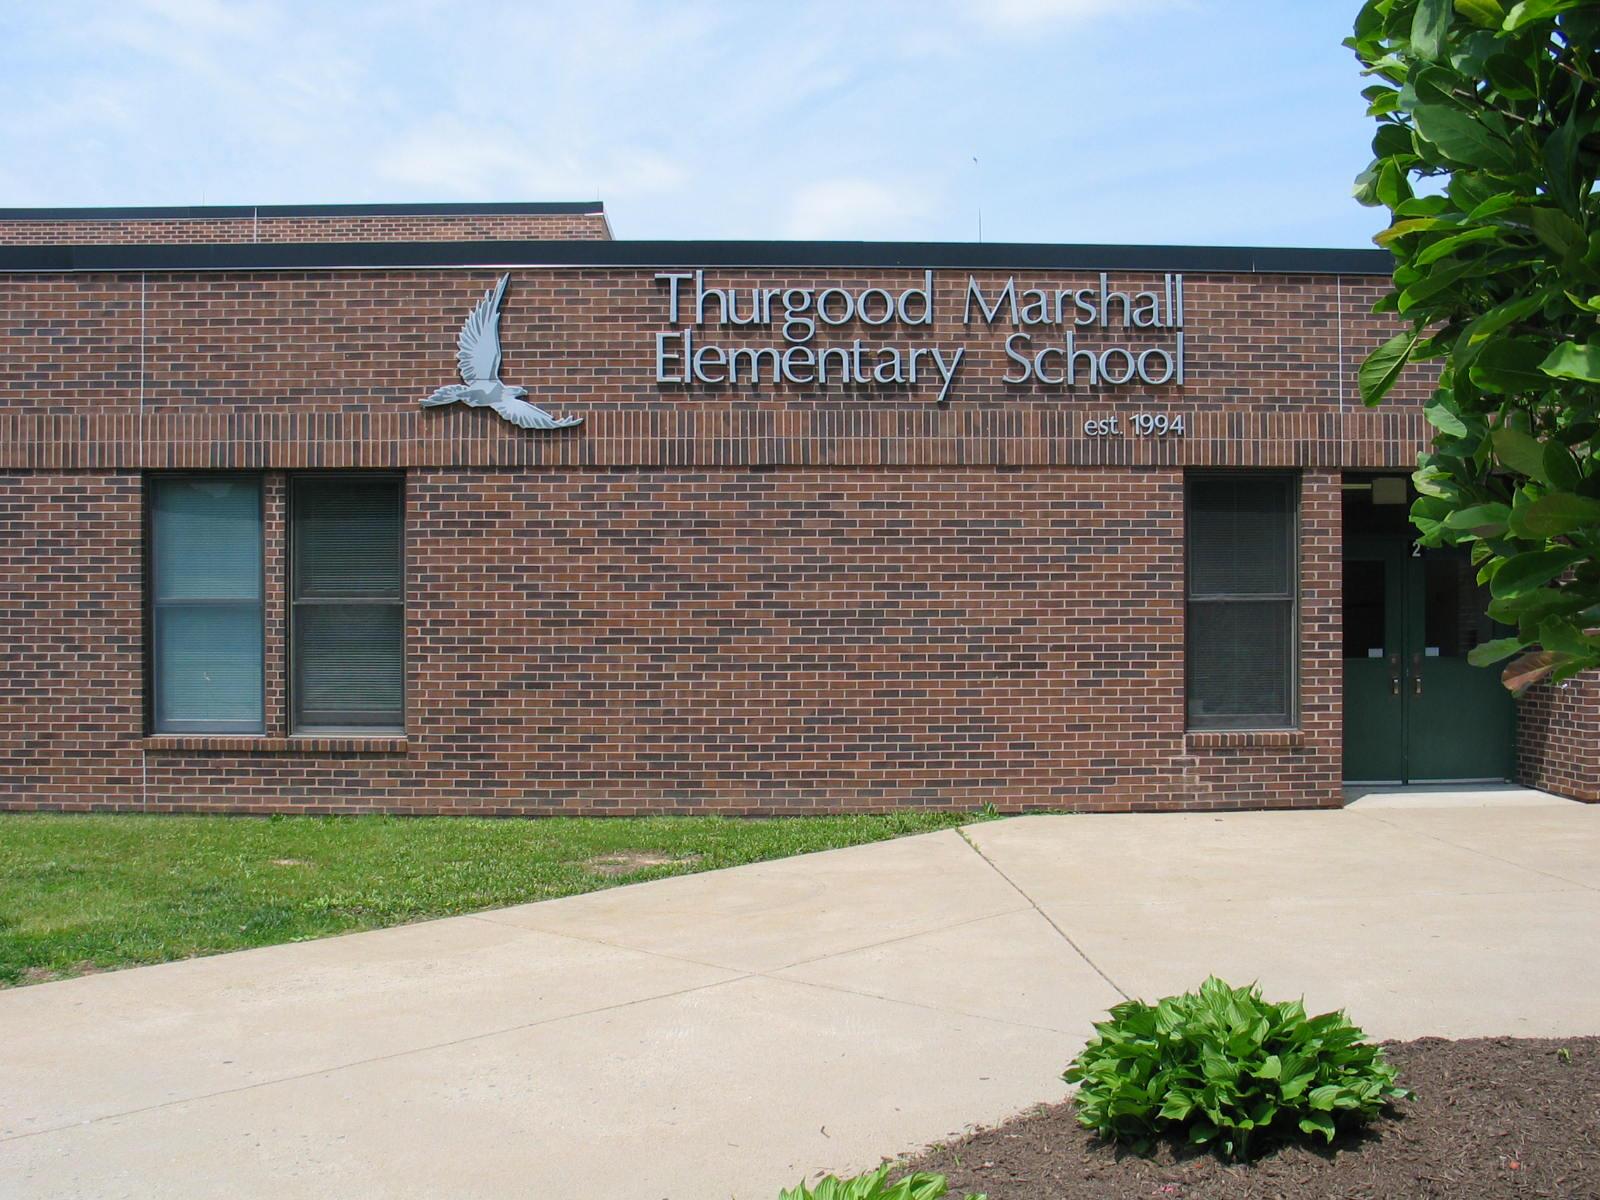 Marshall Elementary School’s Cultural Heritage Night Sparks Controversy